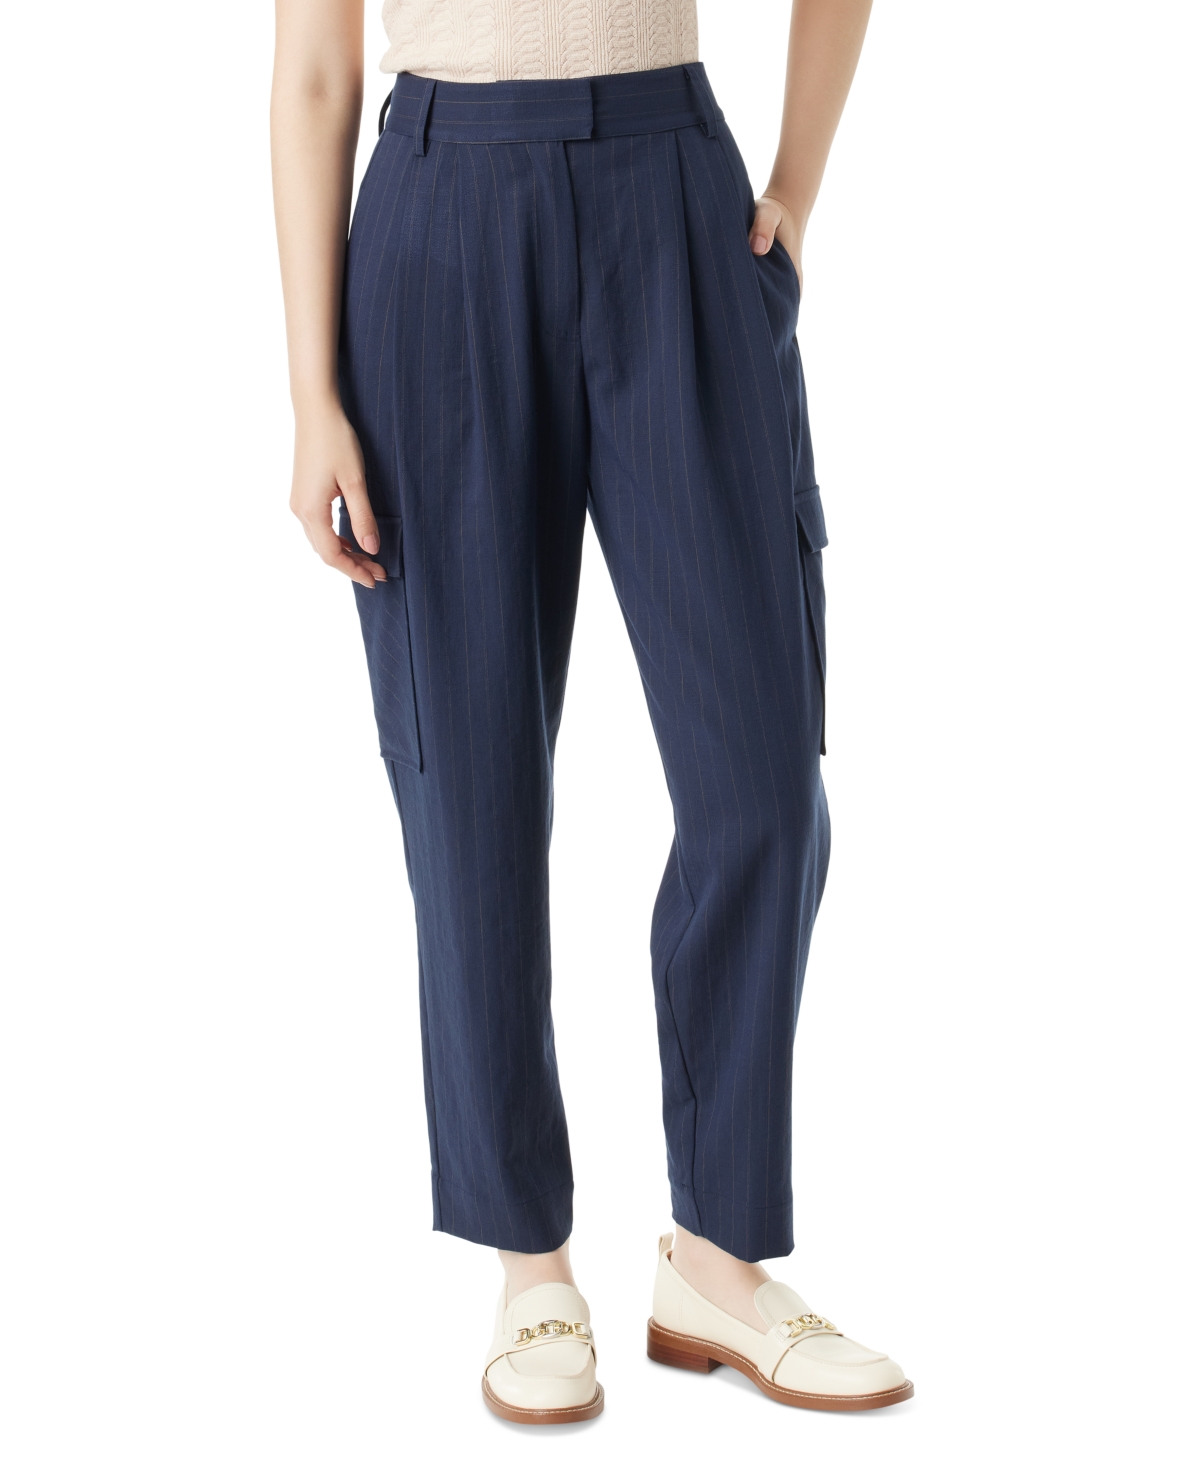 Women's Laila Pinstriped Pleated Tapered Pants - Night Sky